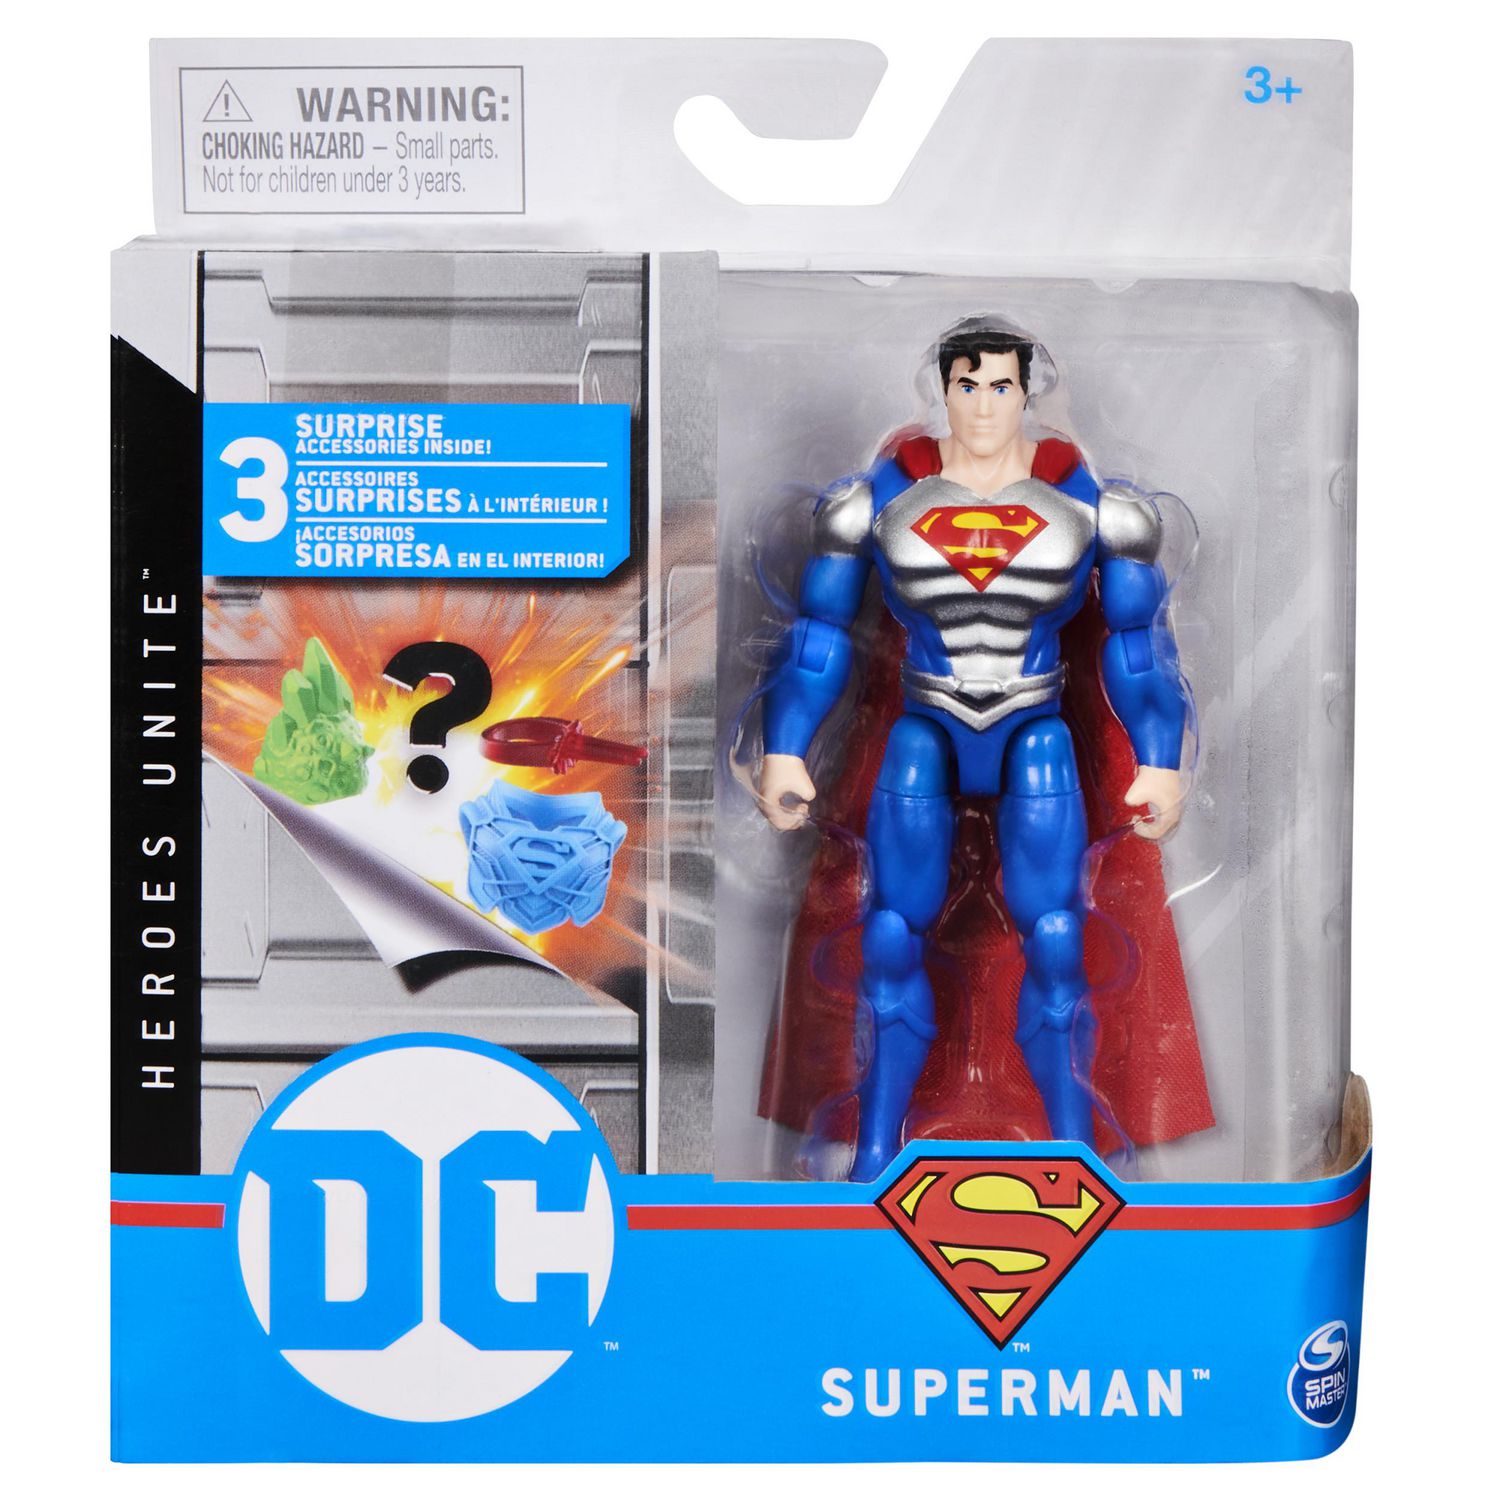 DC Comics 4-inch SUPERMAN Action Figure with 3 Mystery Accessories 